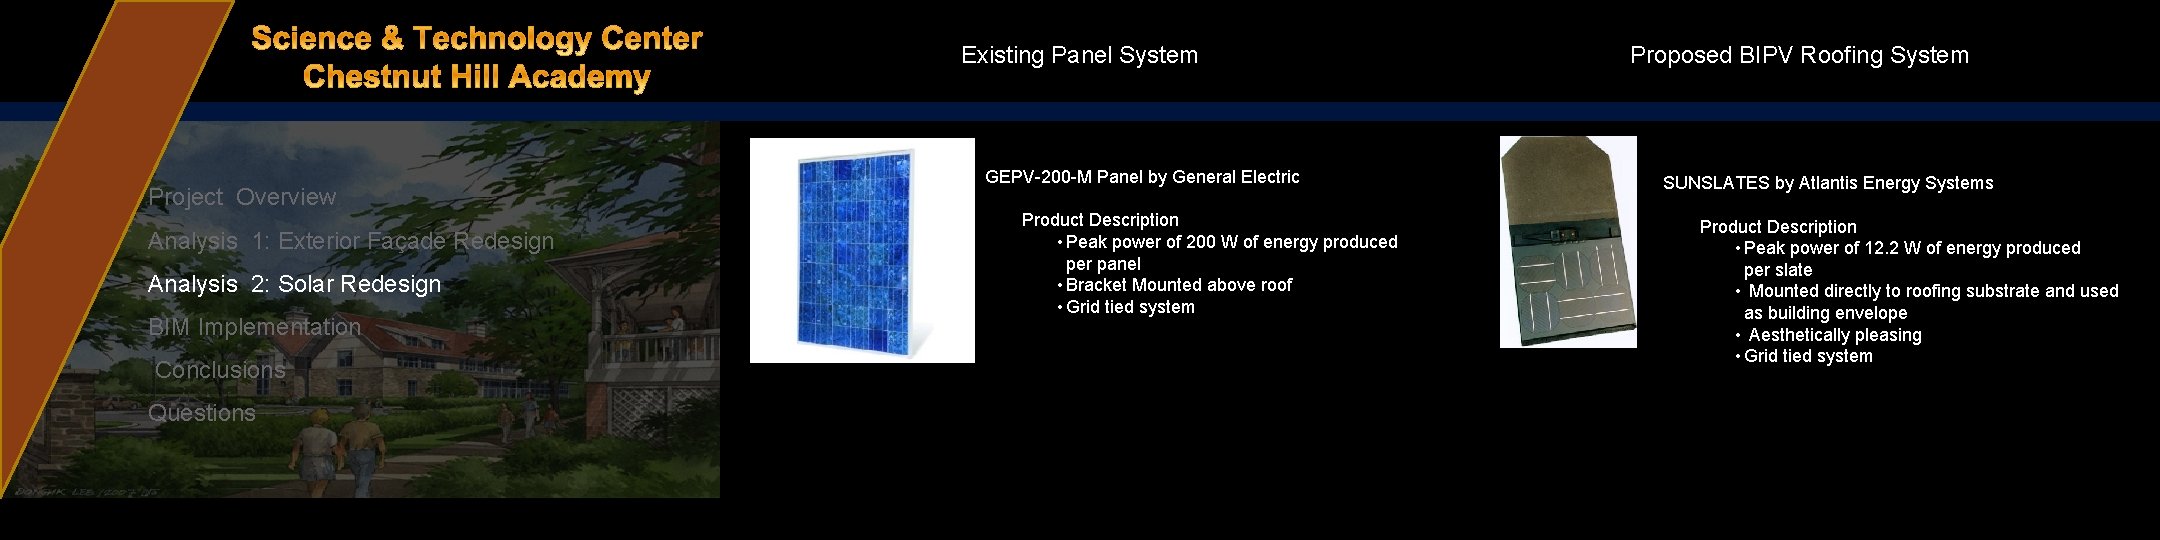 Existing Panel System Project Overview Analysis 1: Exterior Façade Redesign Analysis 2: Solar Redesign